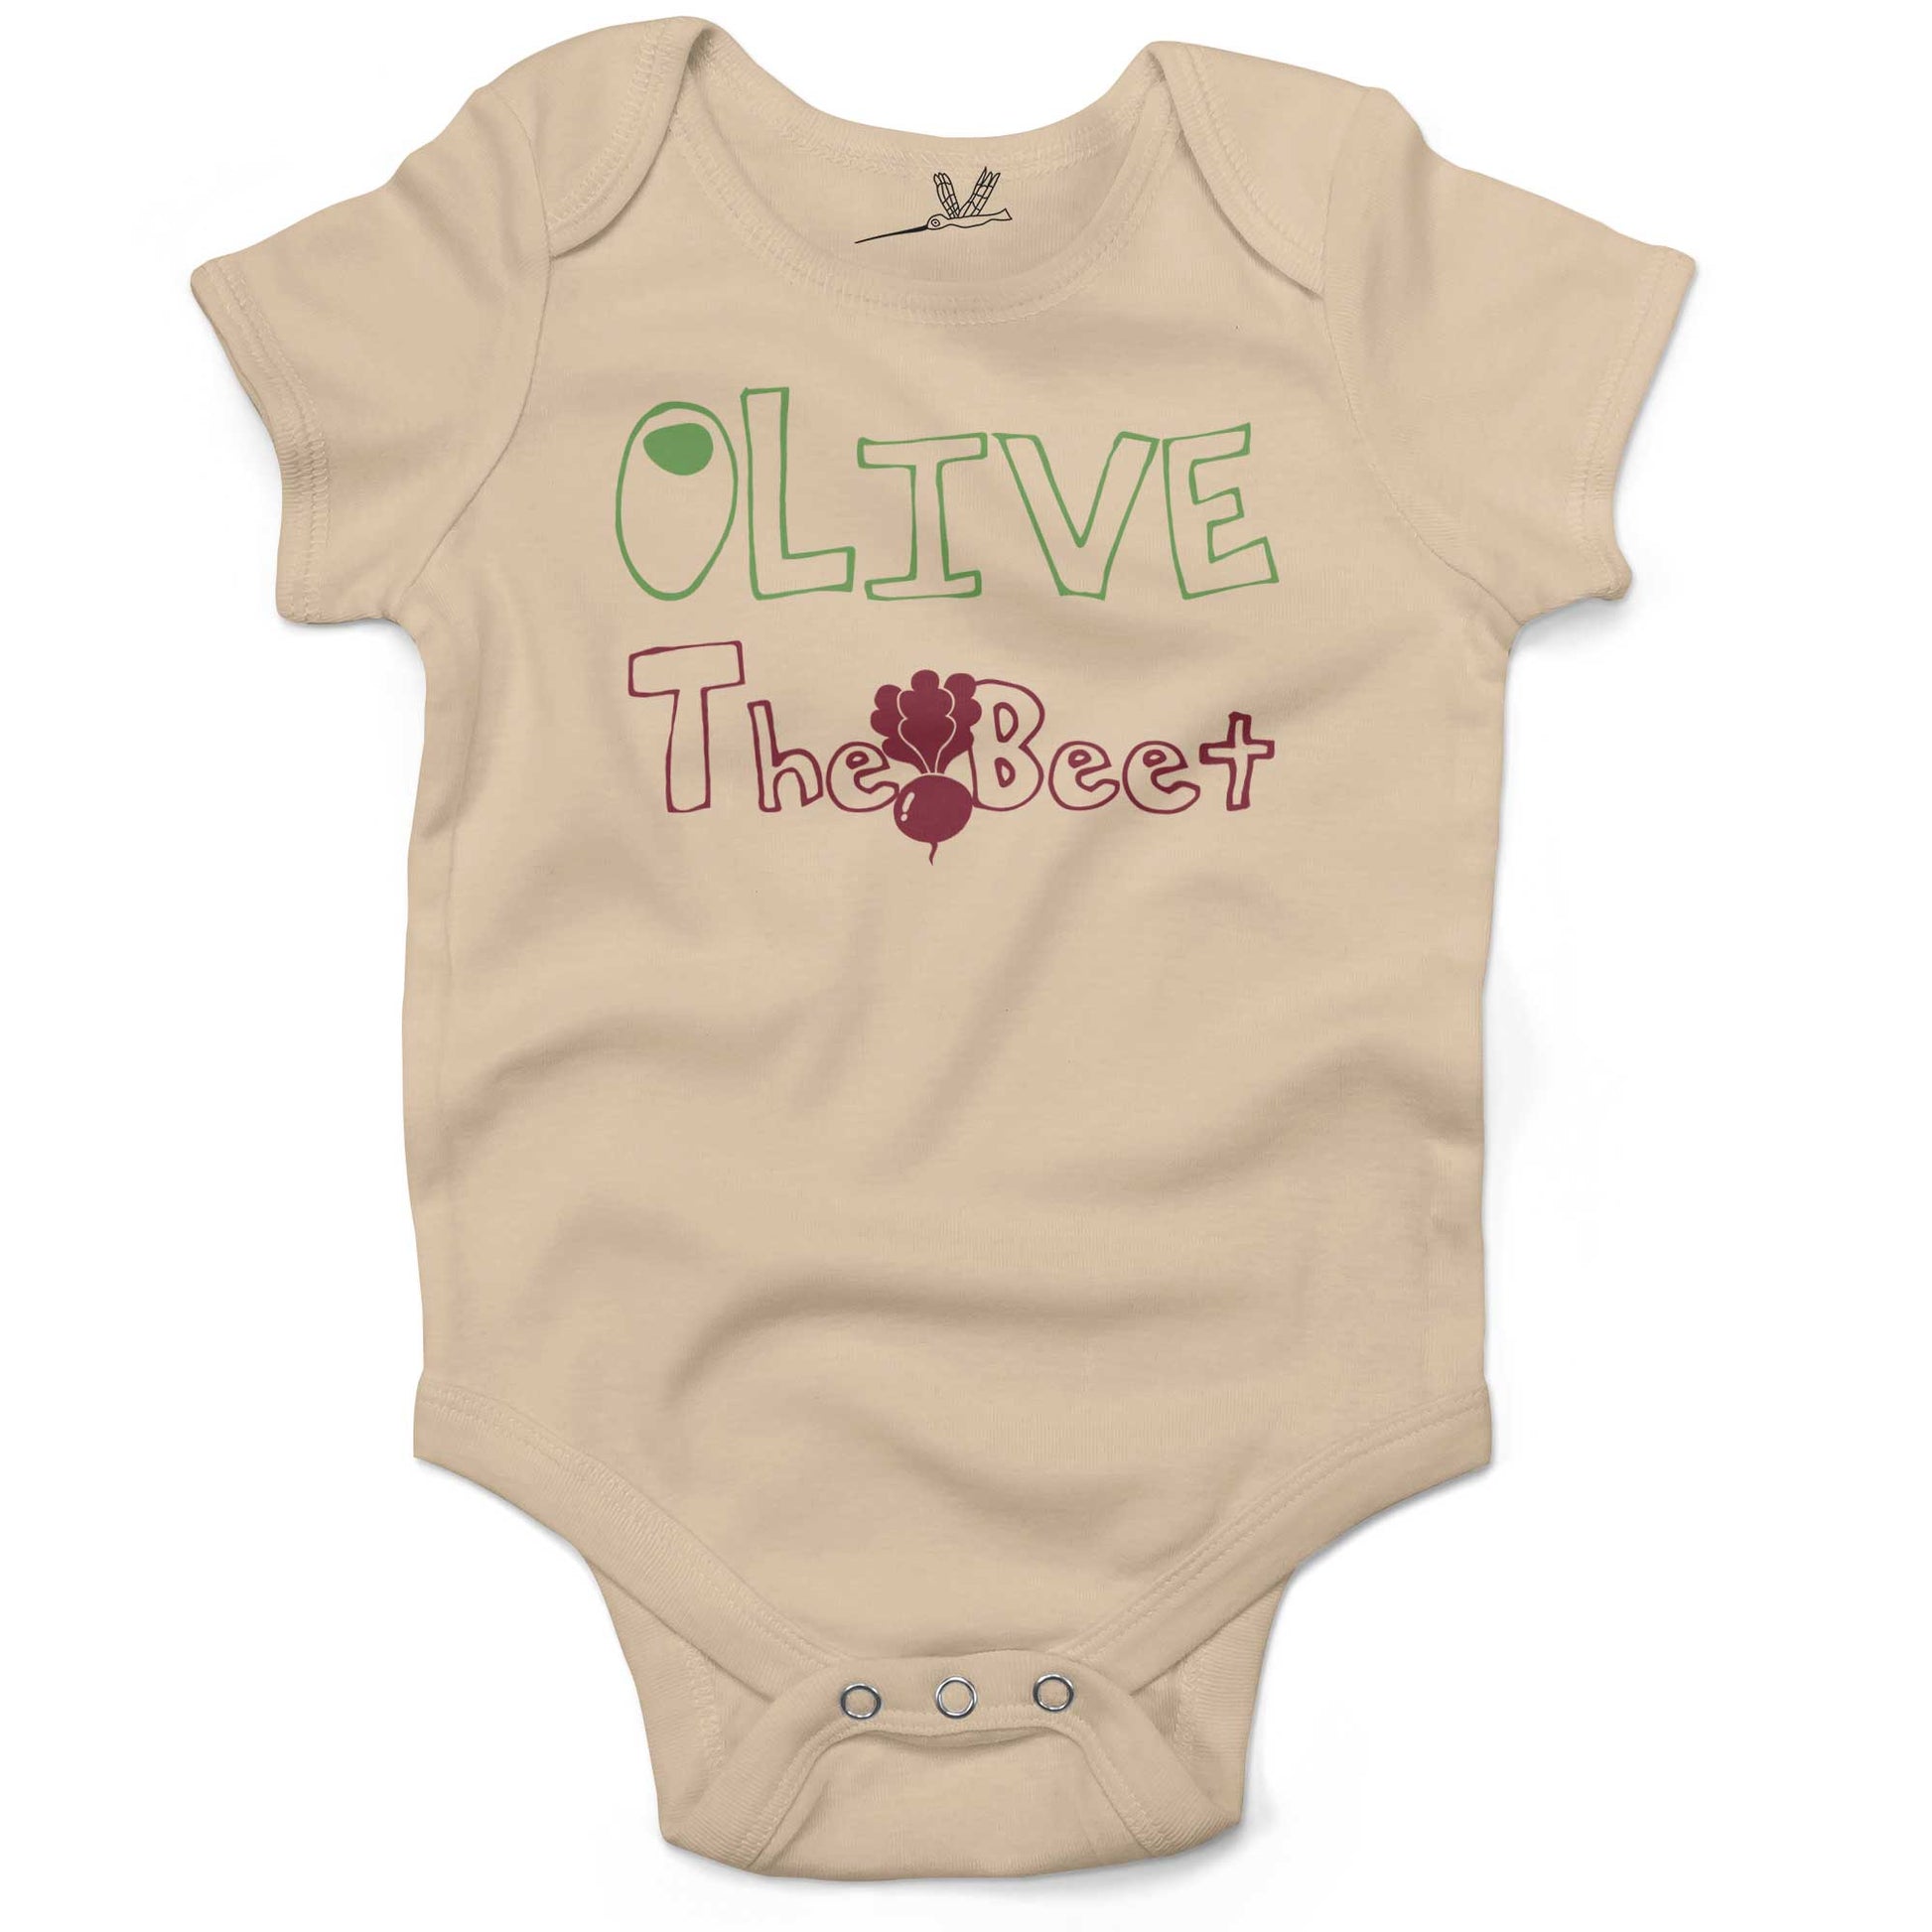 Olive The Beet Infant Bodysuit or Raglan Baby Tee-Organic Natural-3-6 months